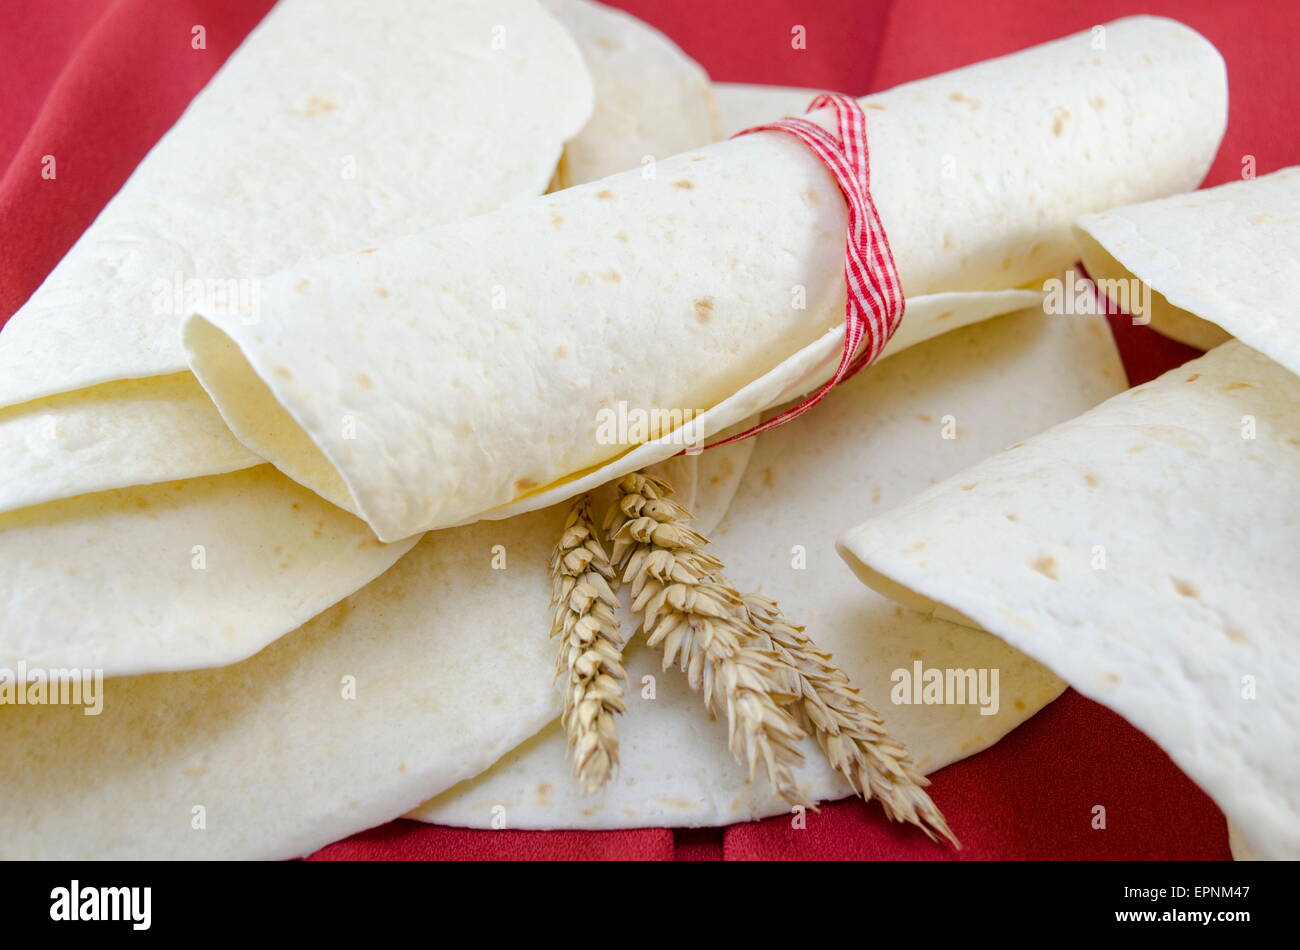 Empty tortillas tied with a ribbon on a table Stock Photo